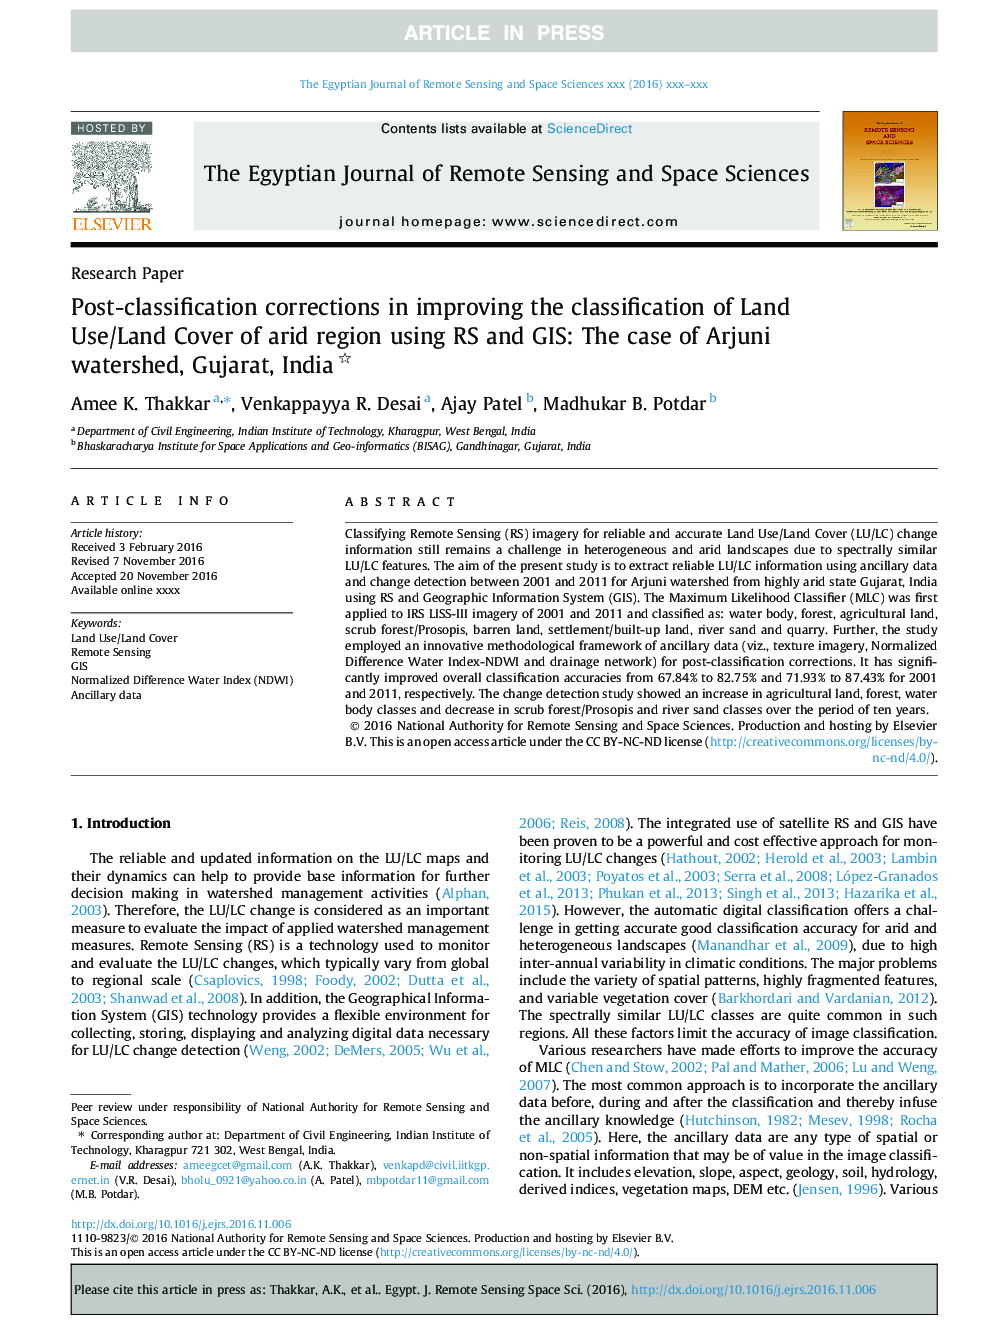 Post-classification corrections in improving the classification of Land Use/Land Cover of arid region using RS and GIS: The case of Arjuni watershed, Gujarat, India